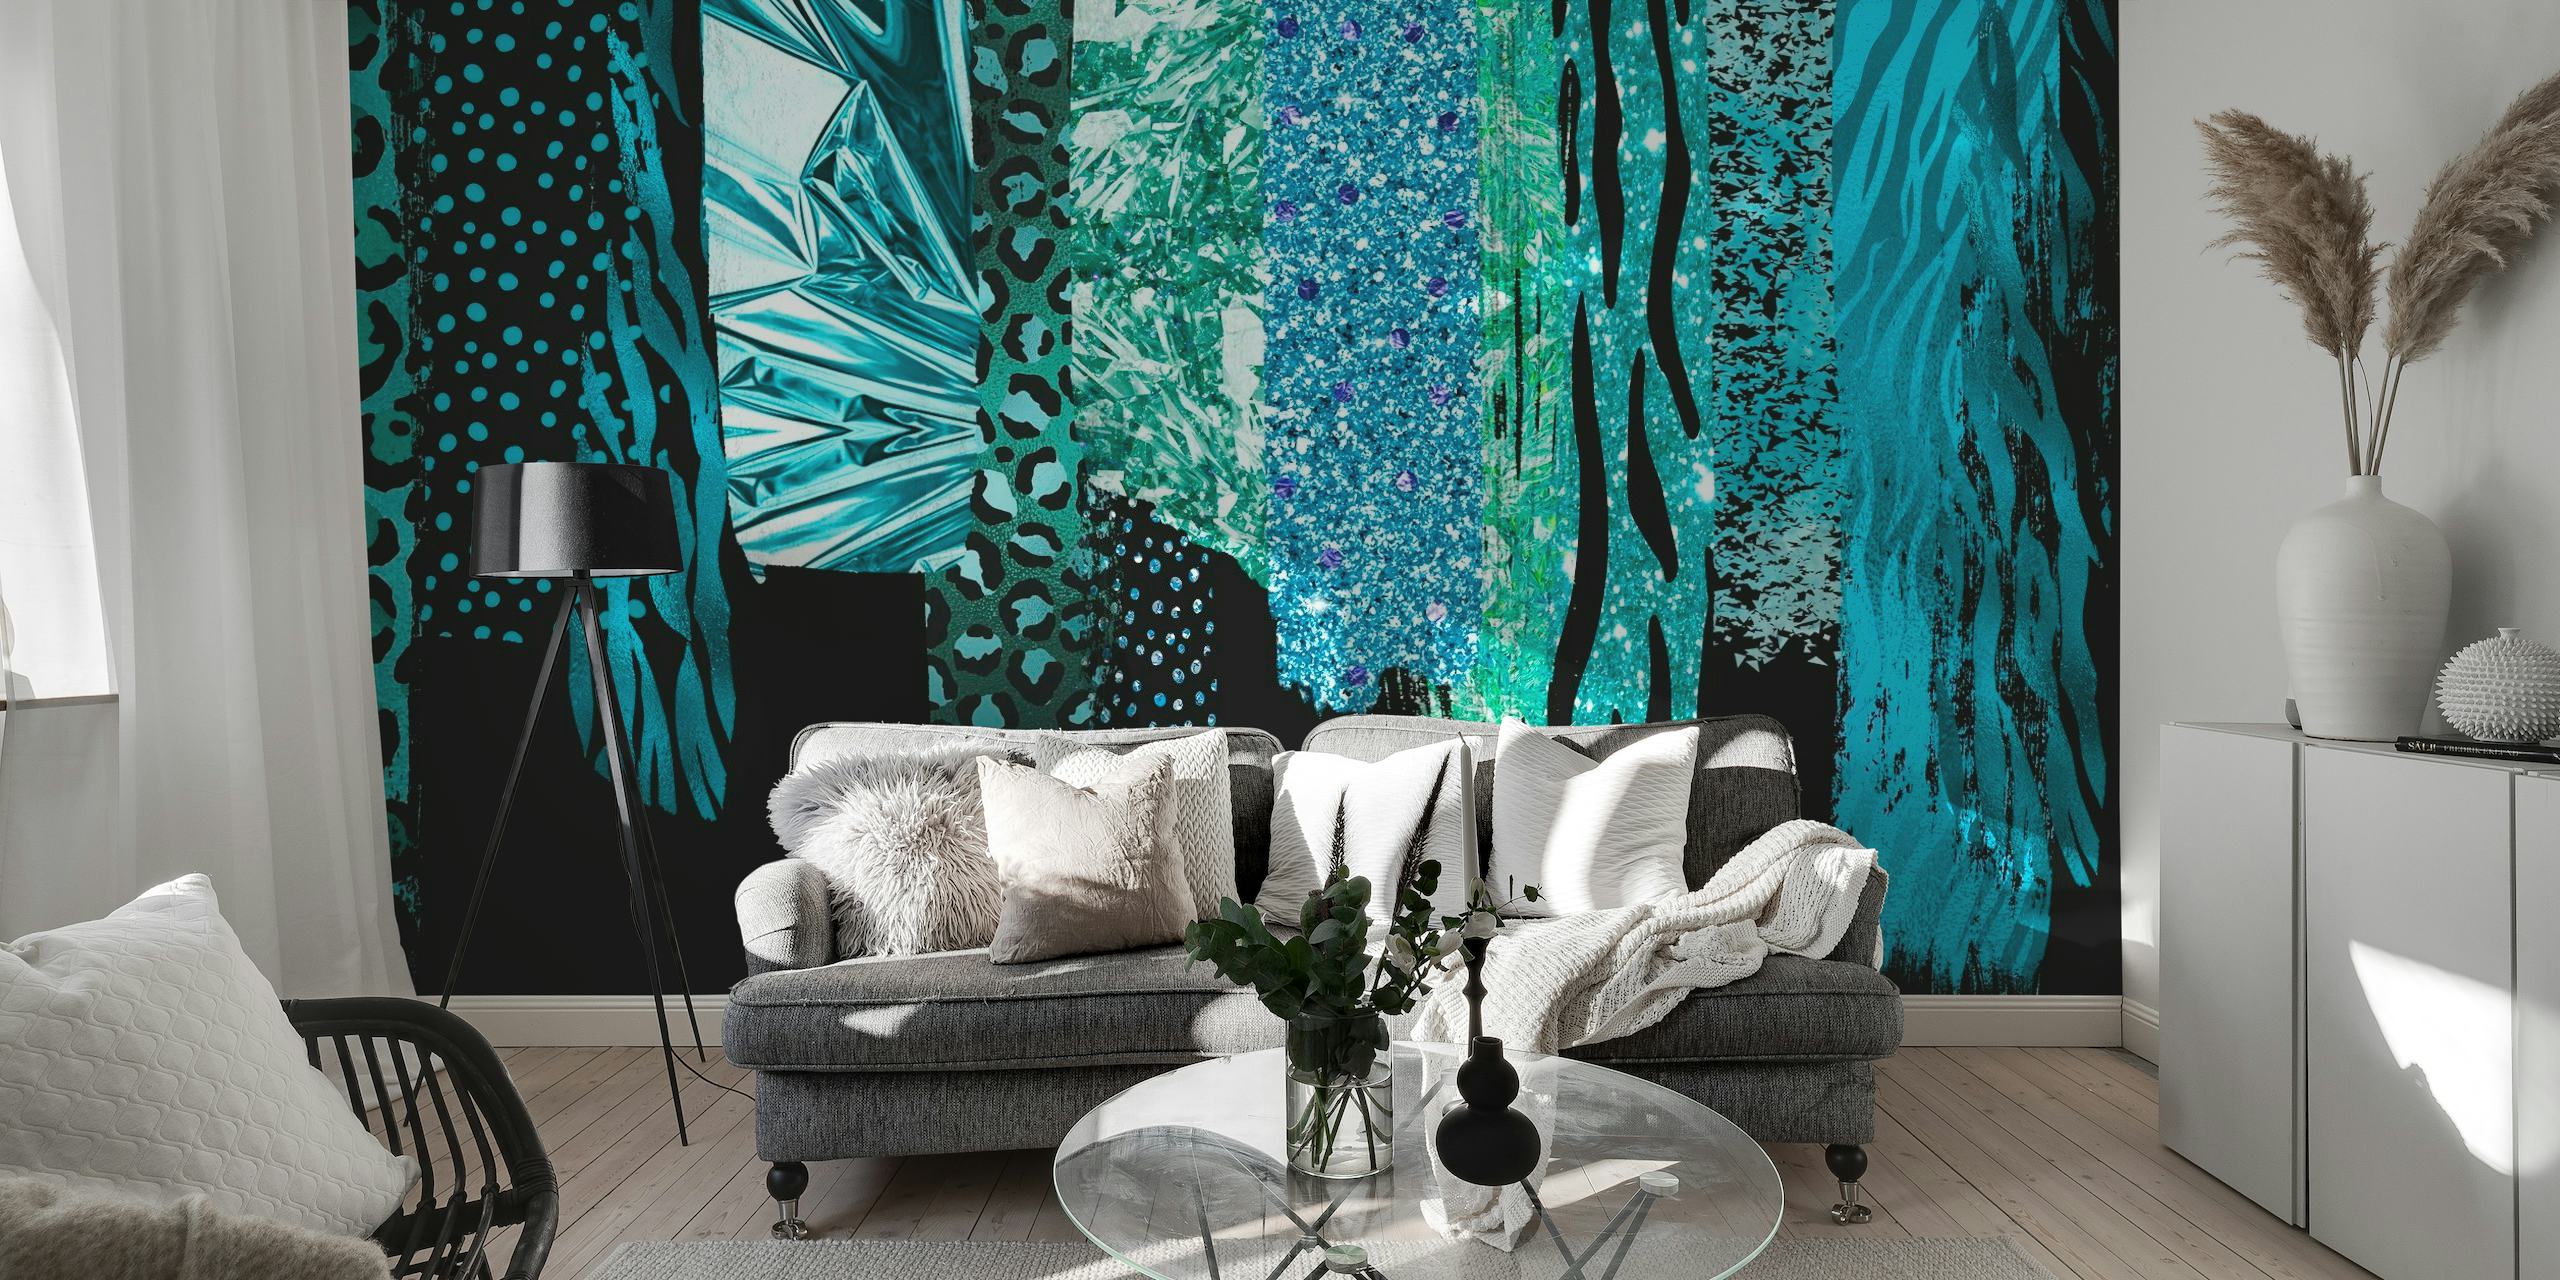 Elegant teal striped wall mural with a textured design